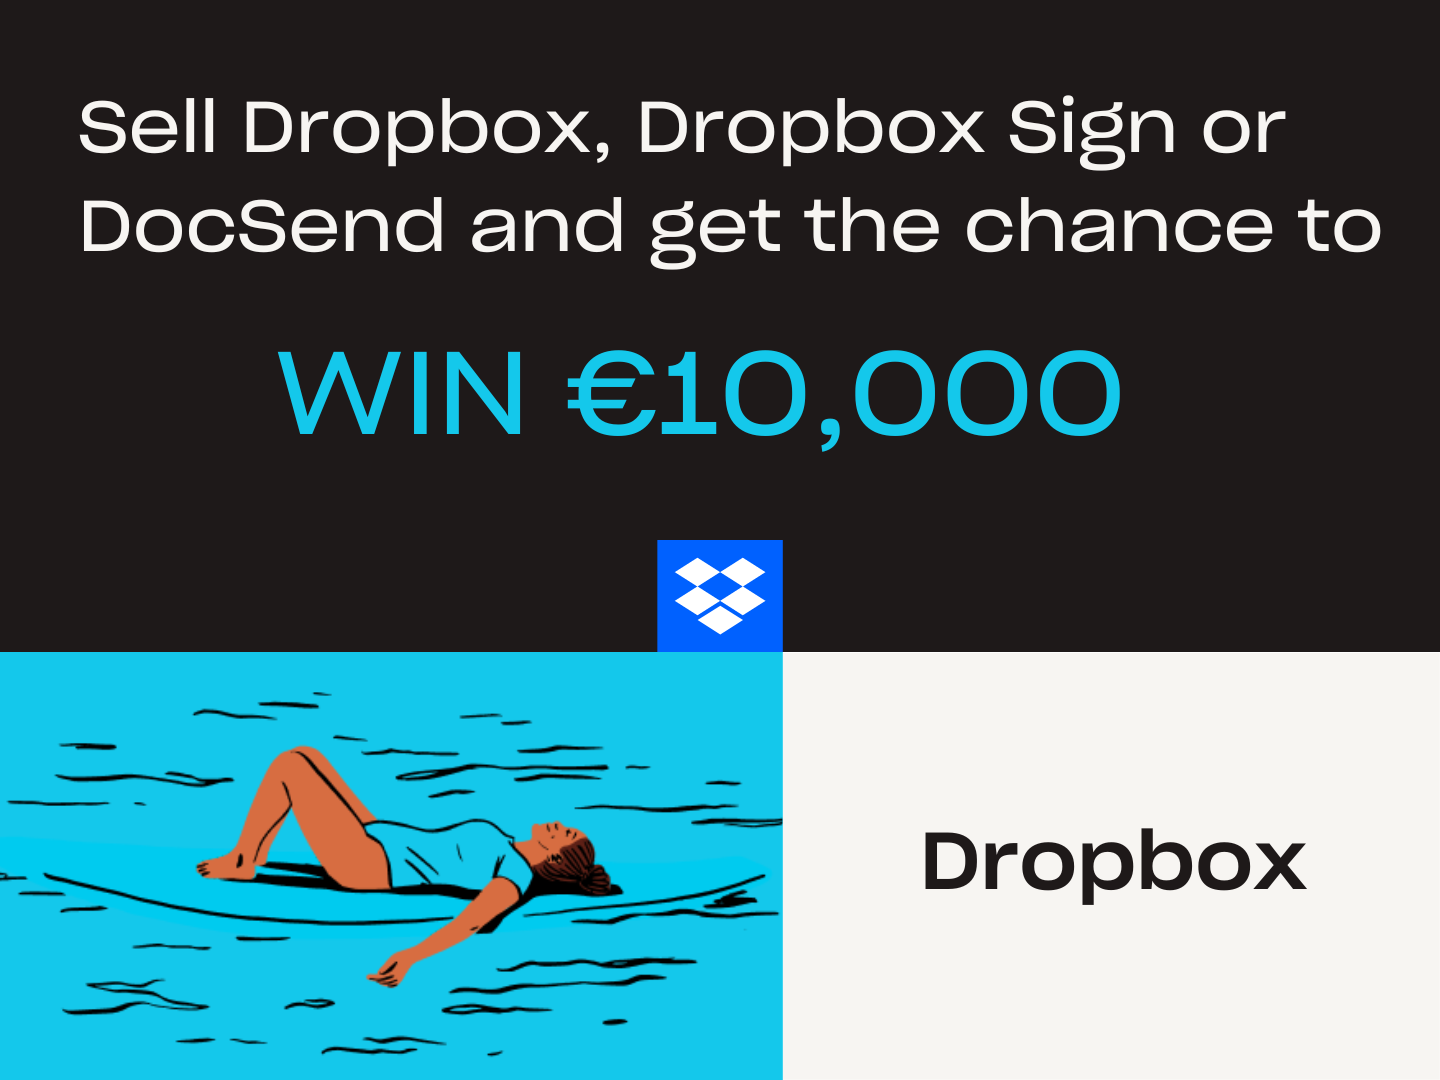 Go into the draw to win €10,000!